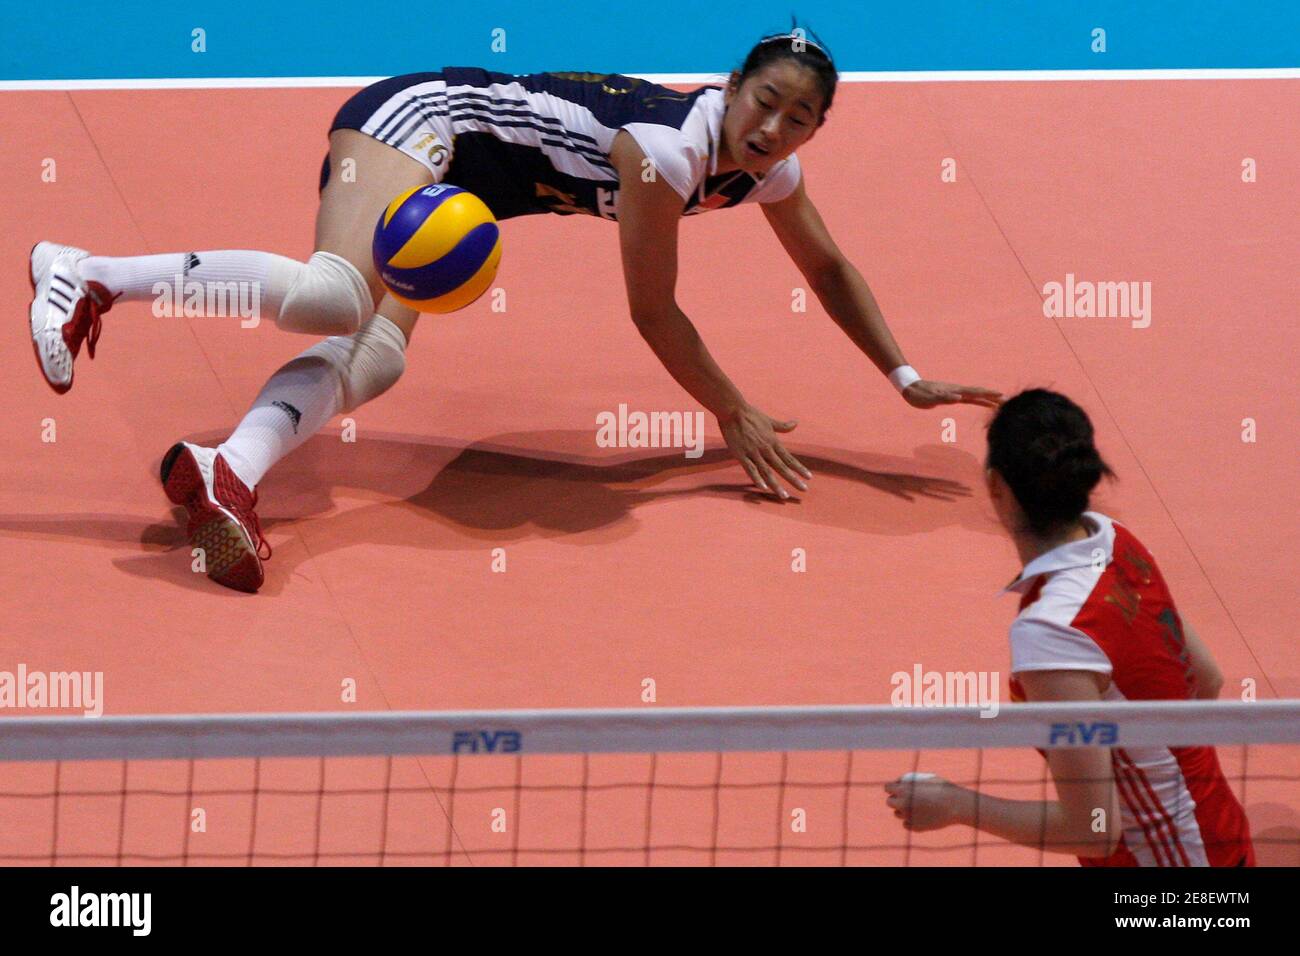 Chu Jinling (top) of China falls on the court during a match against Dominican Republic at the FIVB World Grand Prix women's volleyball tournament in Hong Kong August 14, 2009.    REUTERS/Tyrone Siu    (CHINA SPORT VOLLEYBALL) Stock Photo